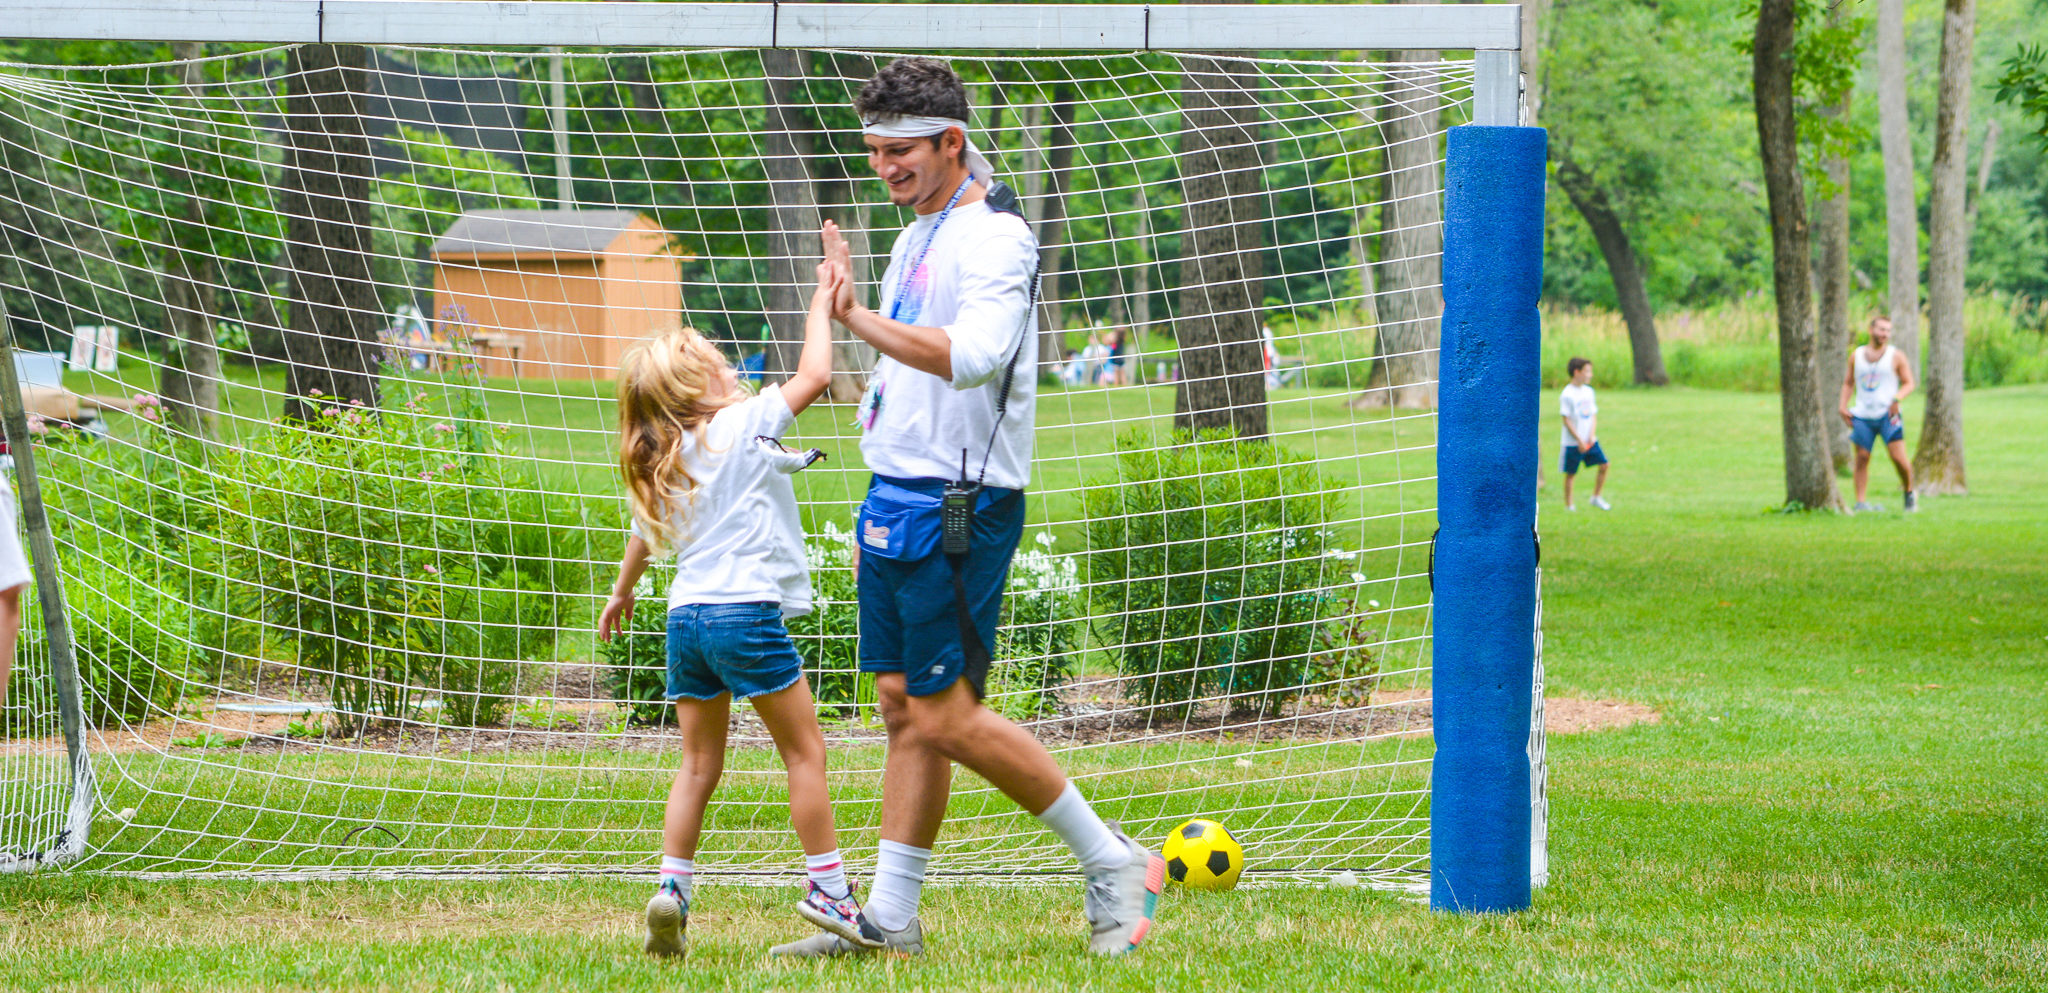 Male counselor encourages female camper while playing soccer